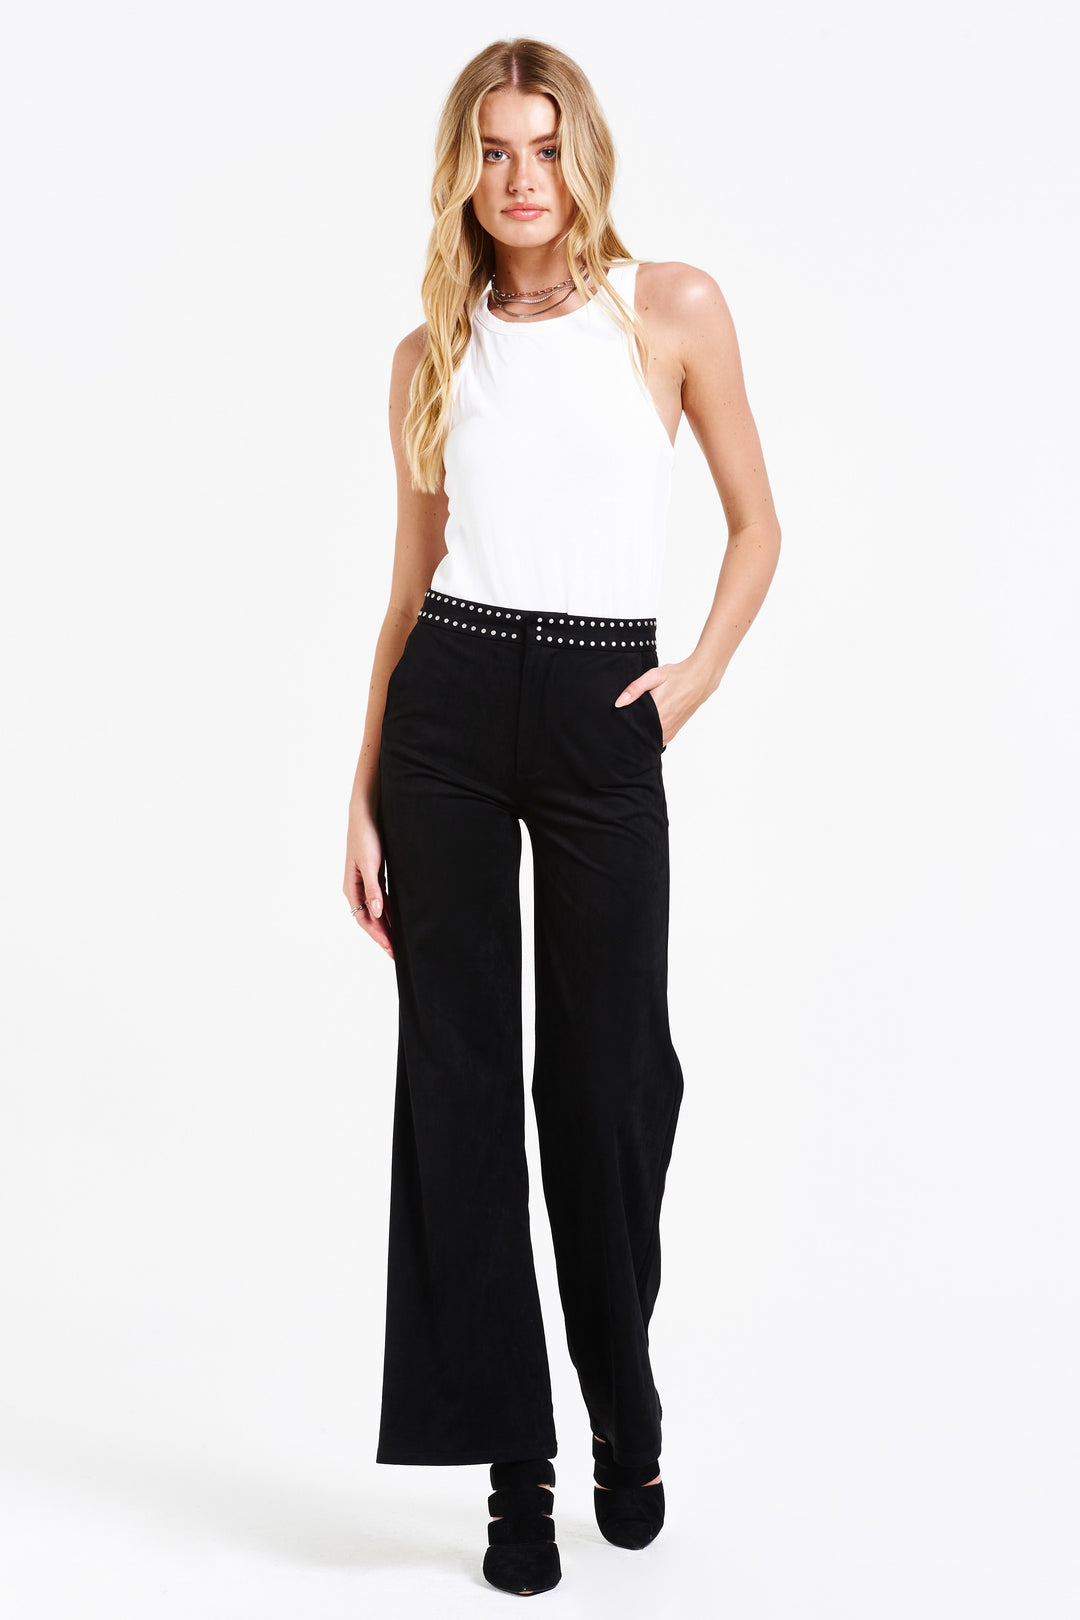 image of a female model wearing a FIONA SUPER HIGH RISE WIDE LEG PANTS BLACK SUEDE PANTS